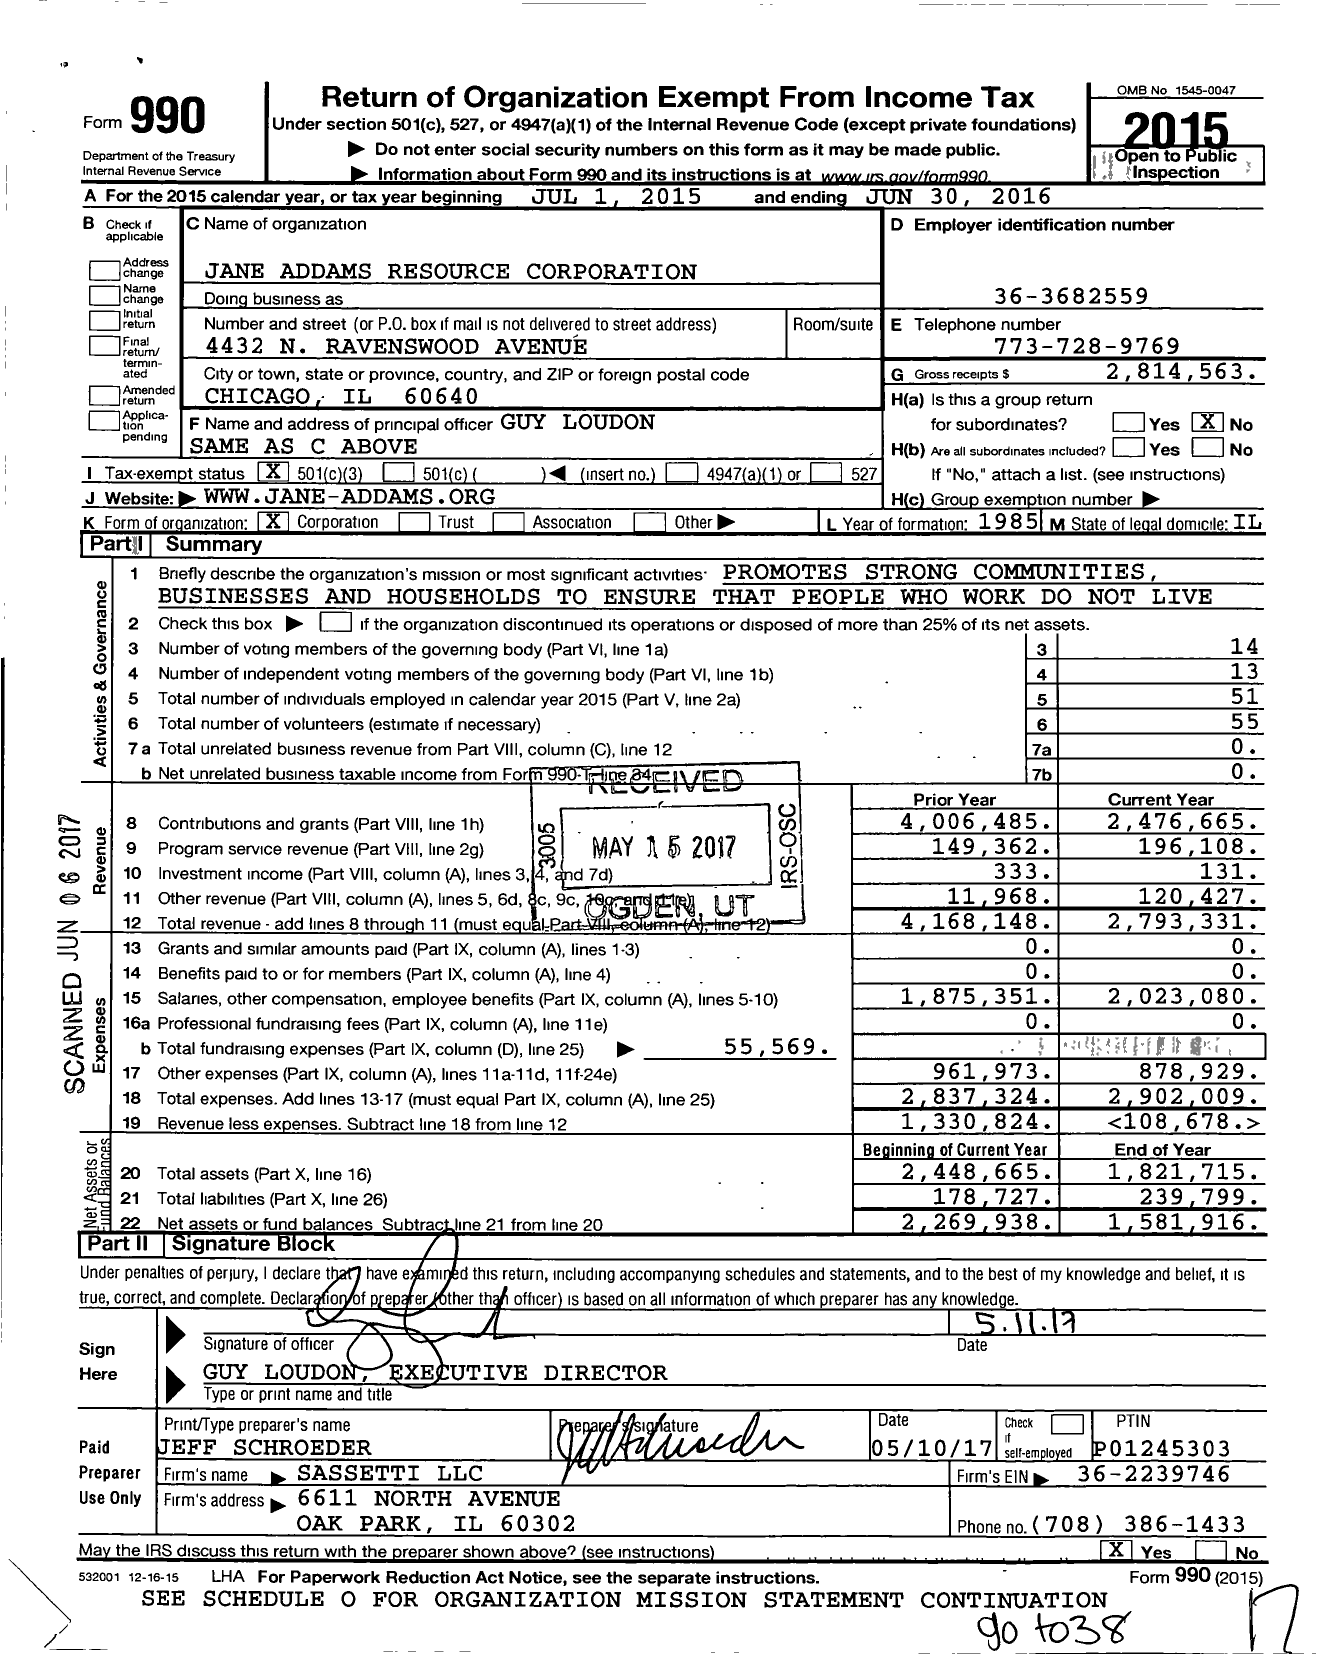 Image of first page of 2015 Form 990 for Jane Addams Resource Corporation (JARC)